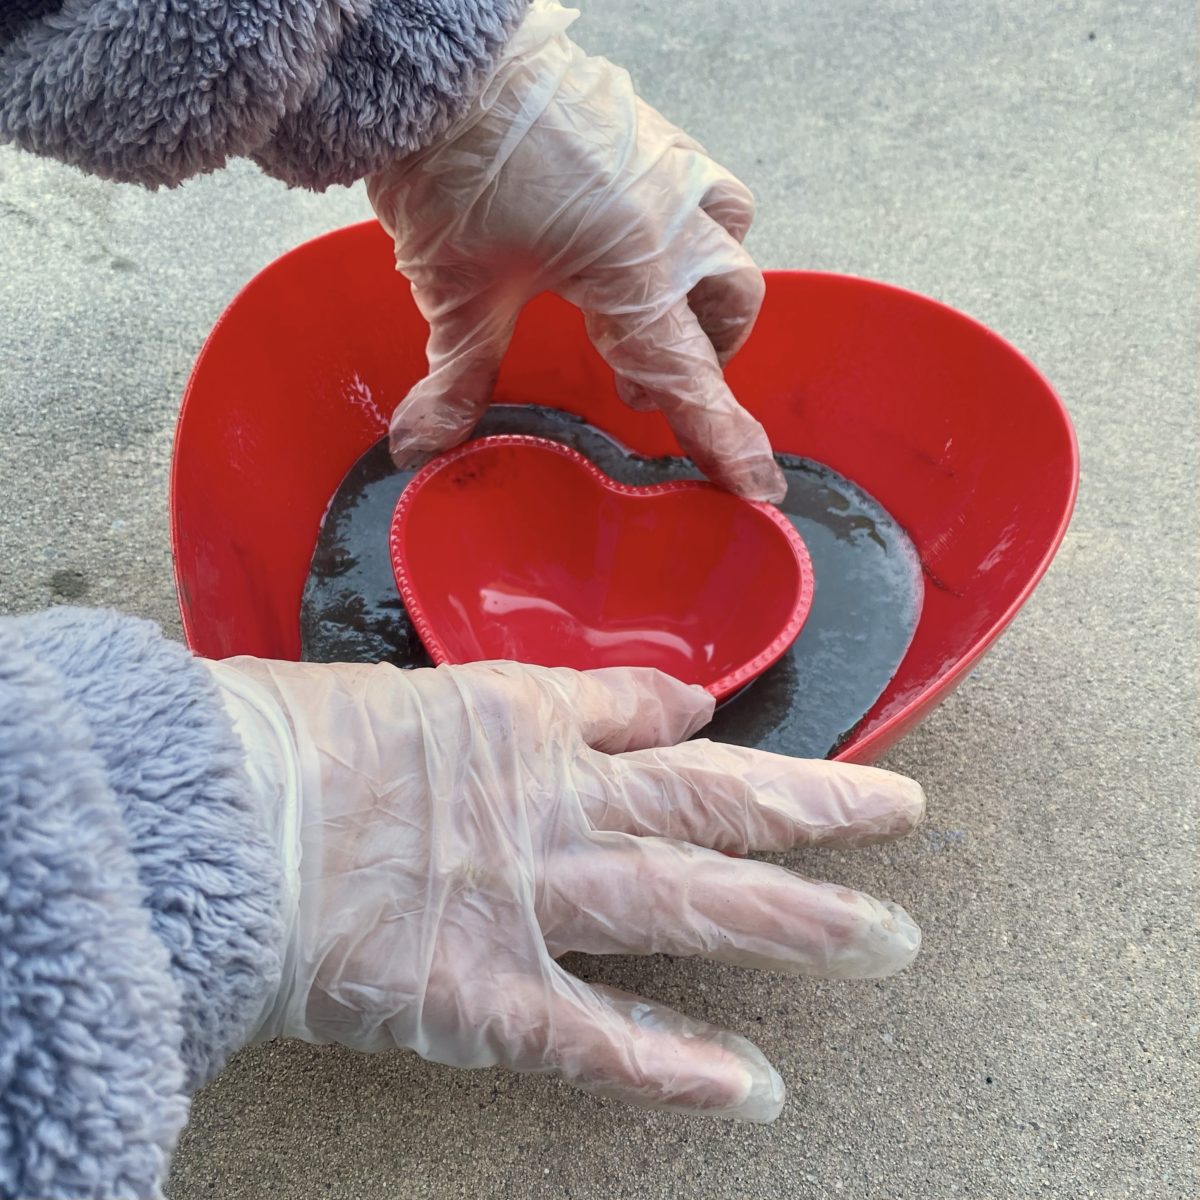 Pressing a smaller heart bowl into the concrete in the larger heart bowl.